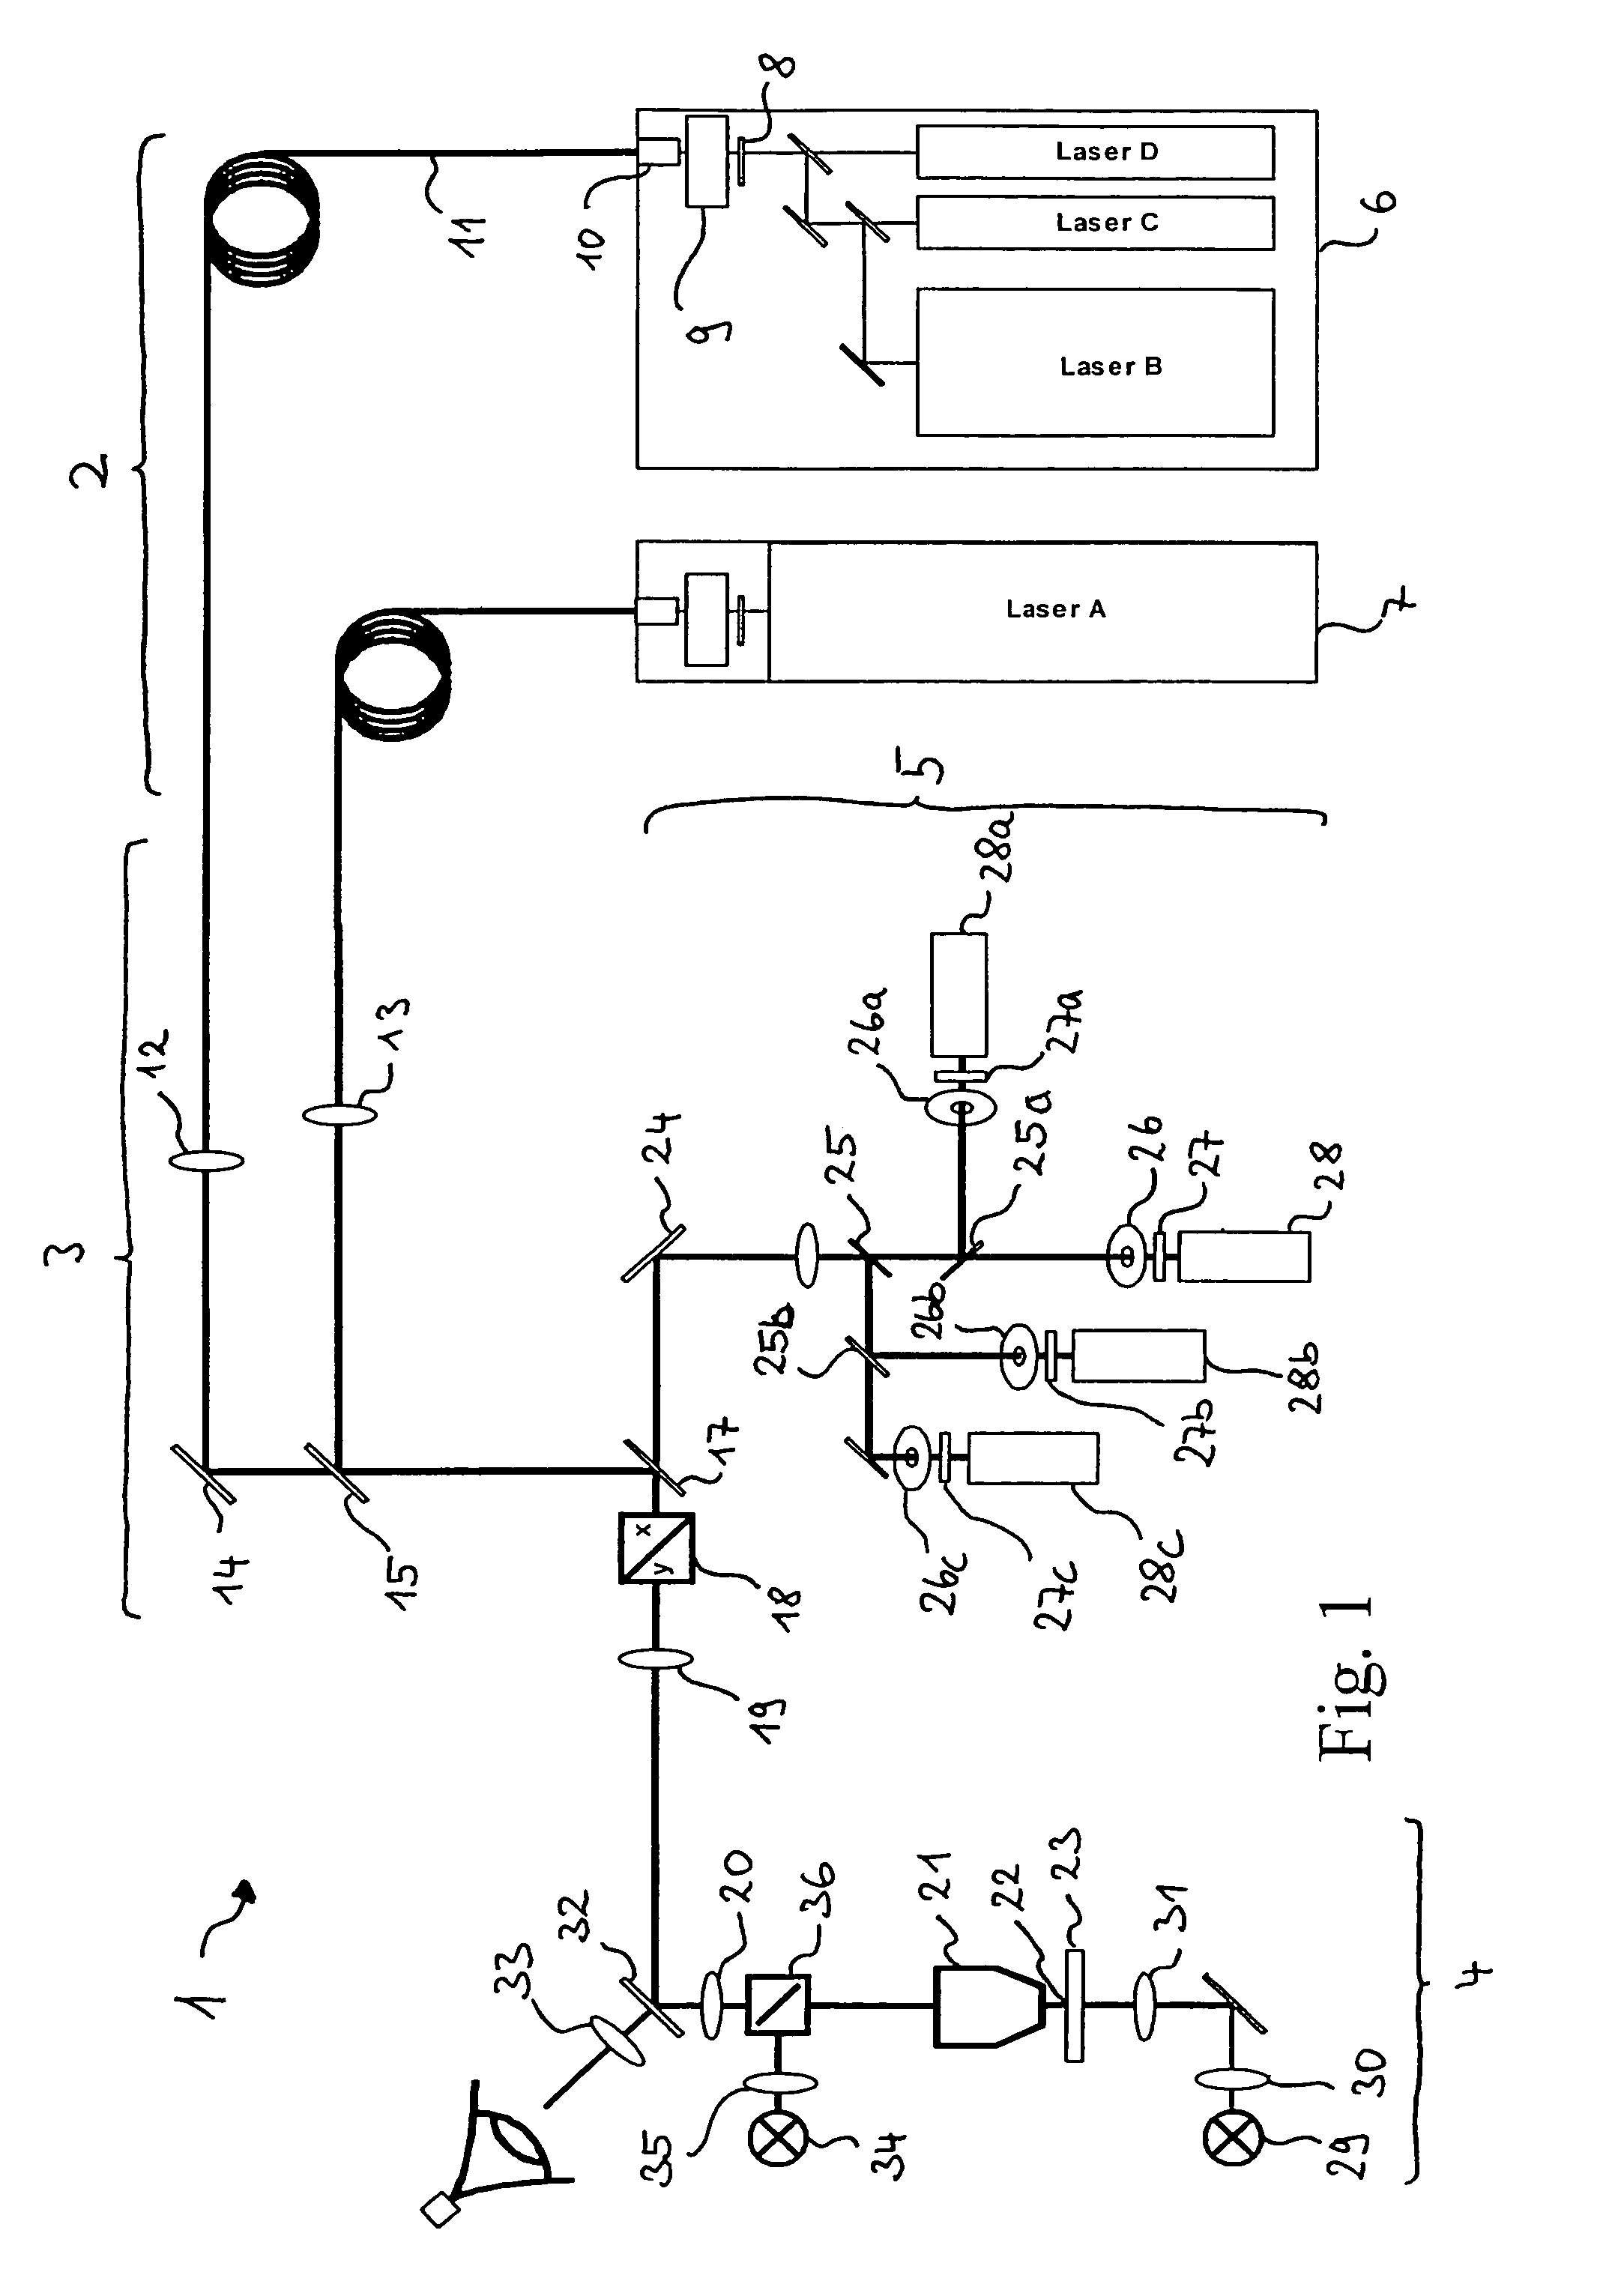 Laser line scanning microscope and method of use